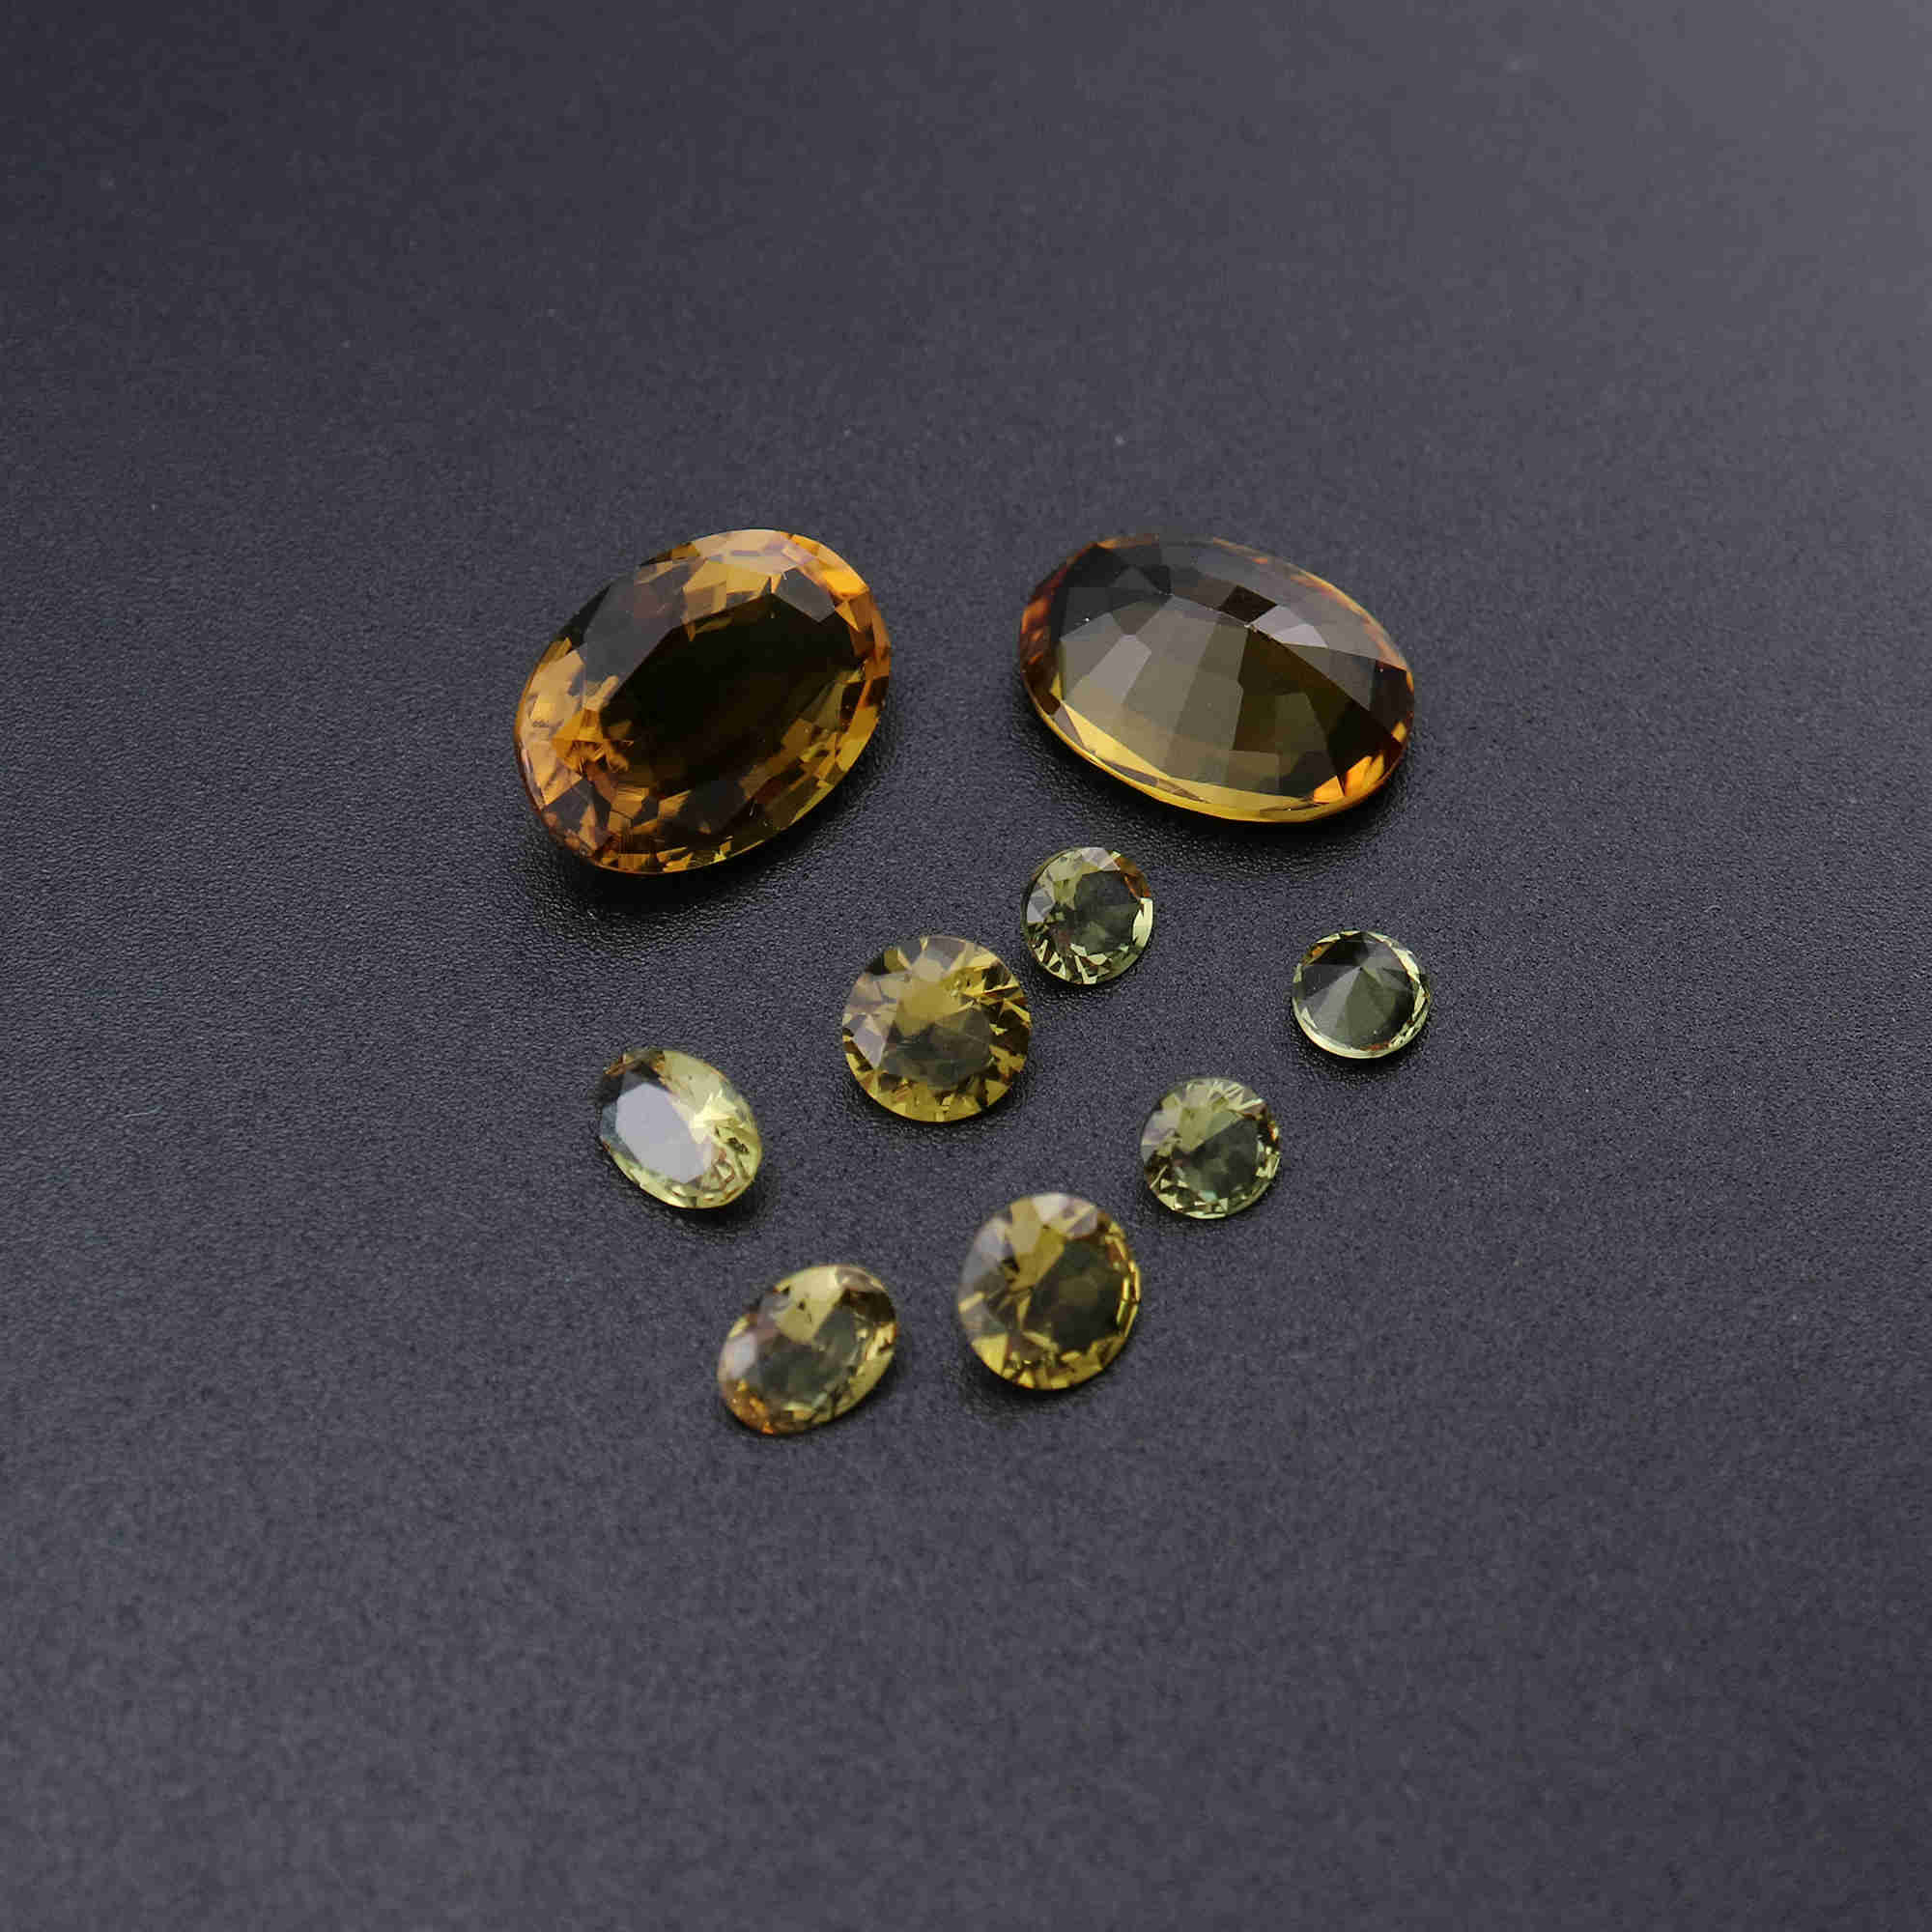 Multiple size cabochons, Faceted sharp back, Lab-created diaspore, Gemstone DIY, 2000x2000 HD Phone